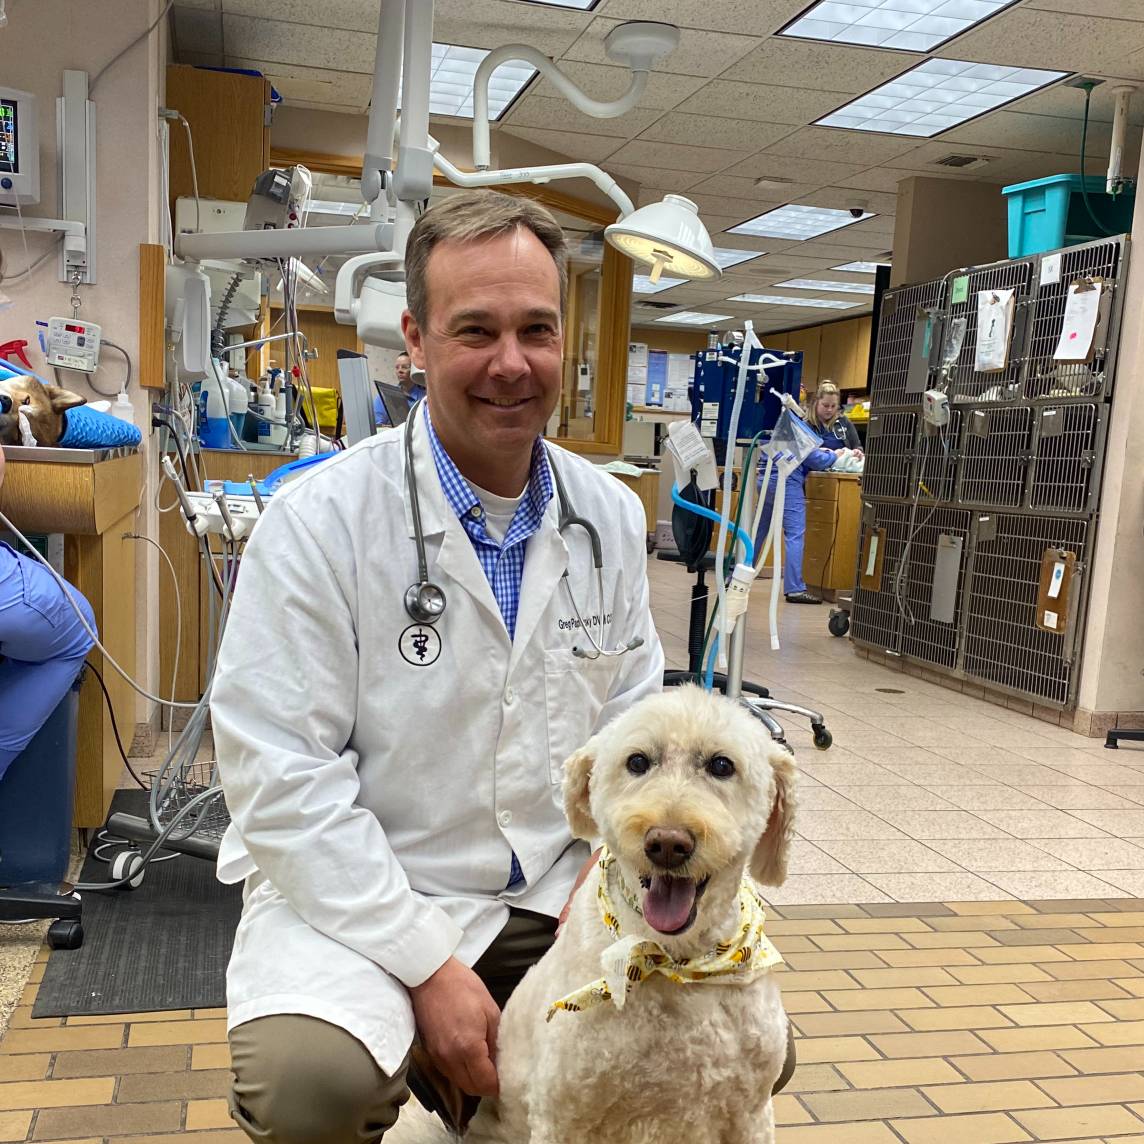 Dr. Paplawsky pictured with Molly, a dog who participated in a clinical trial.